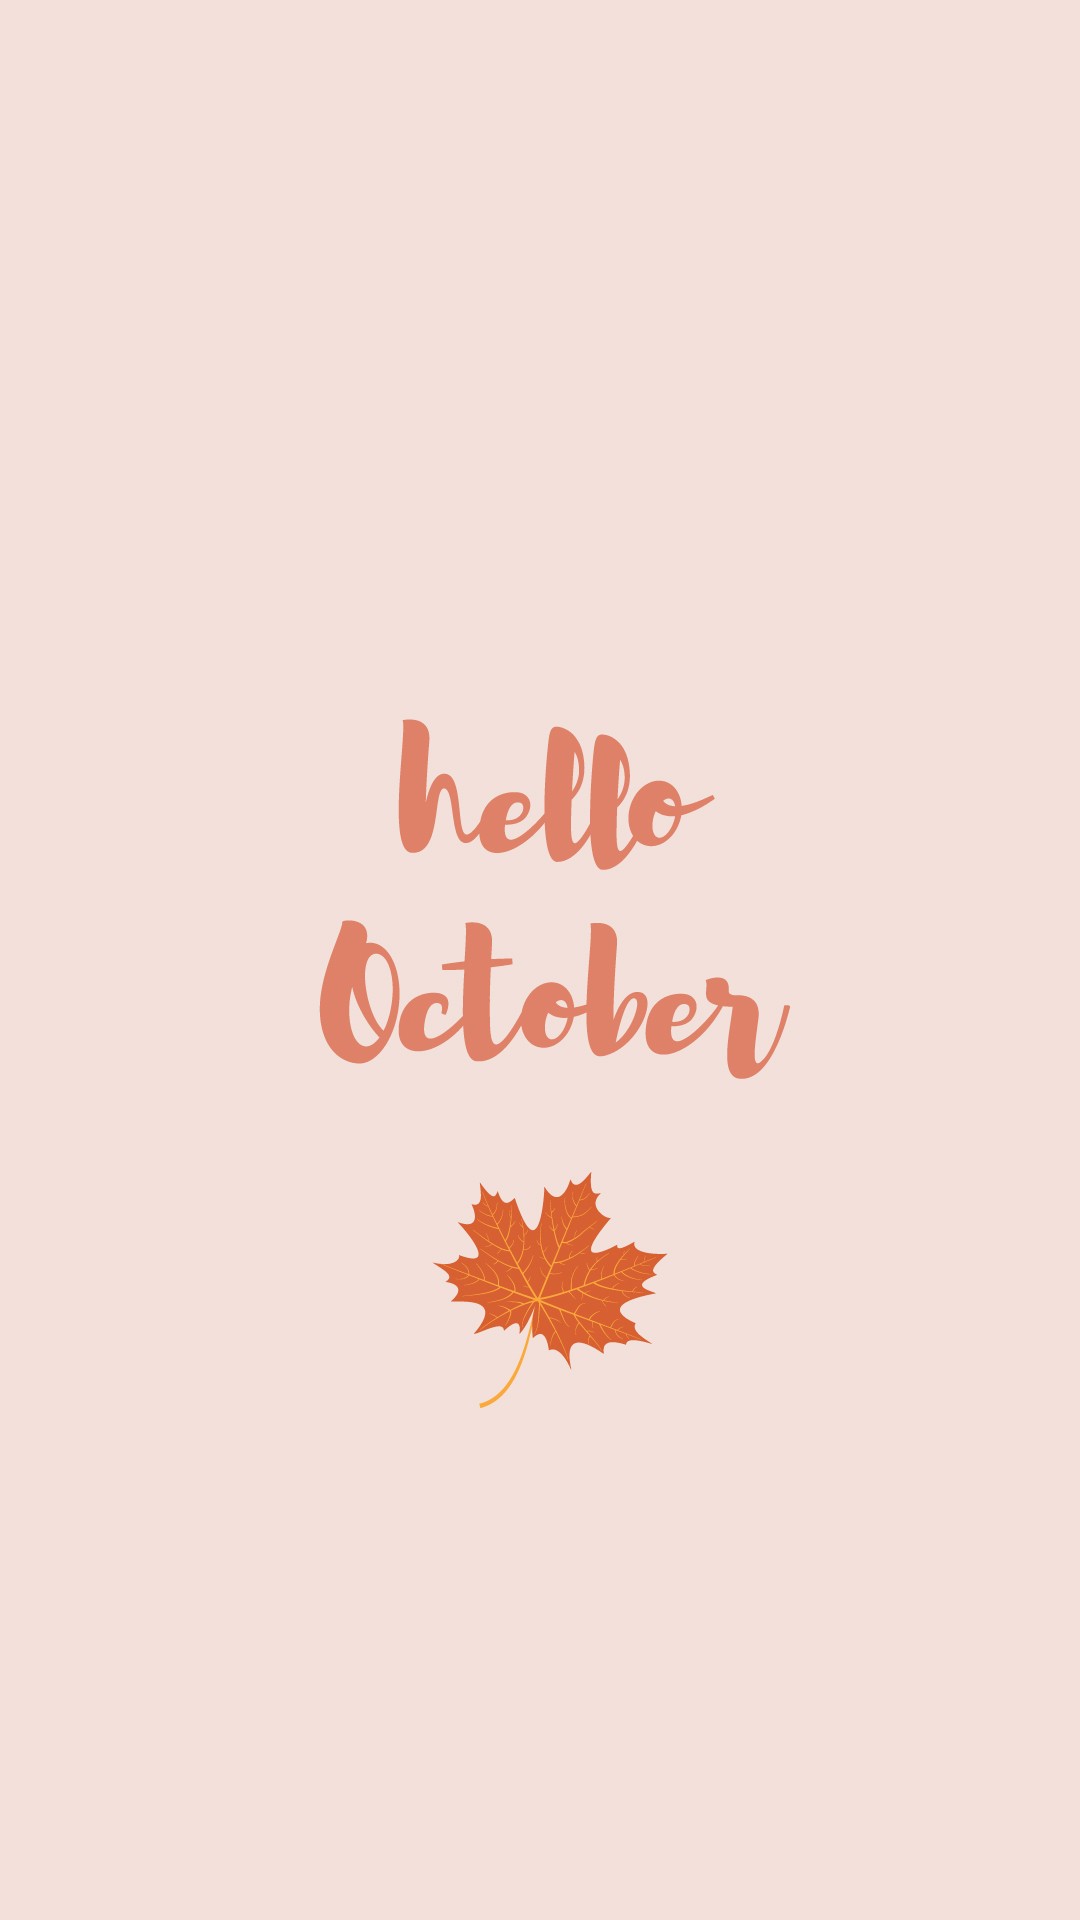 Hello October Wallpaper - KoLPaPer - Awesome Free HD Wallpapers